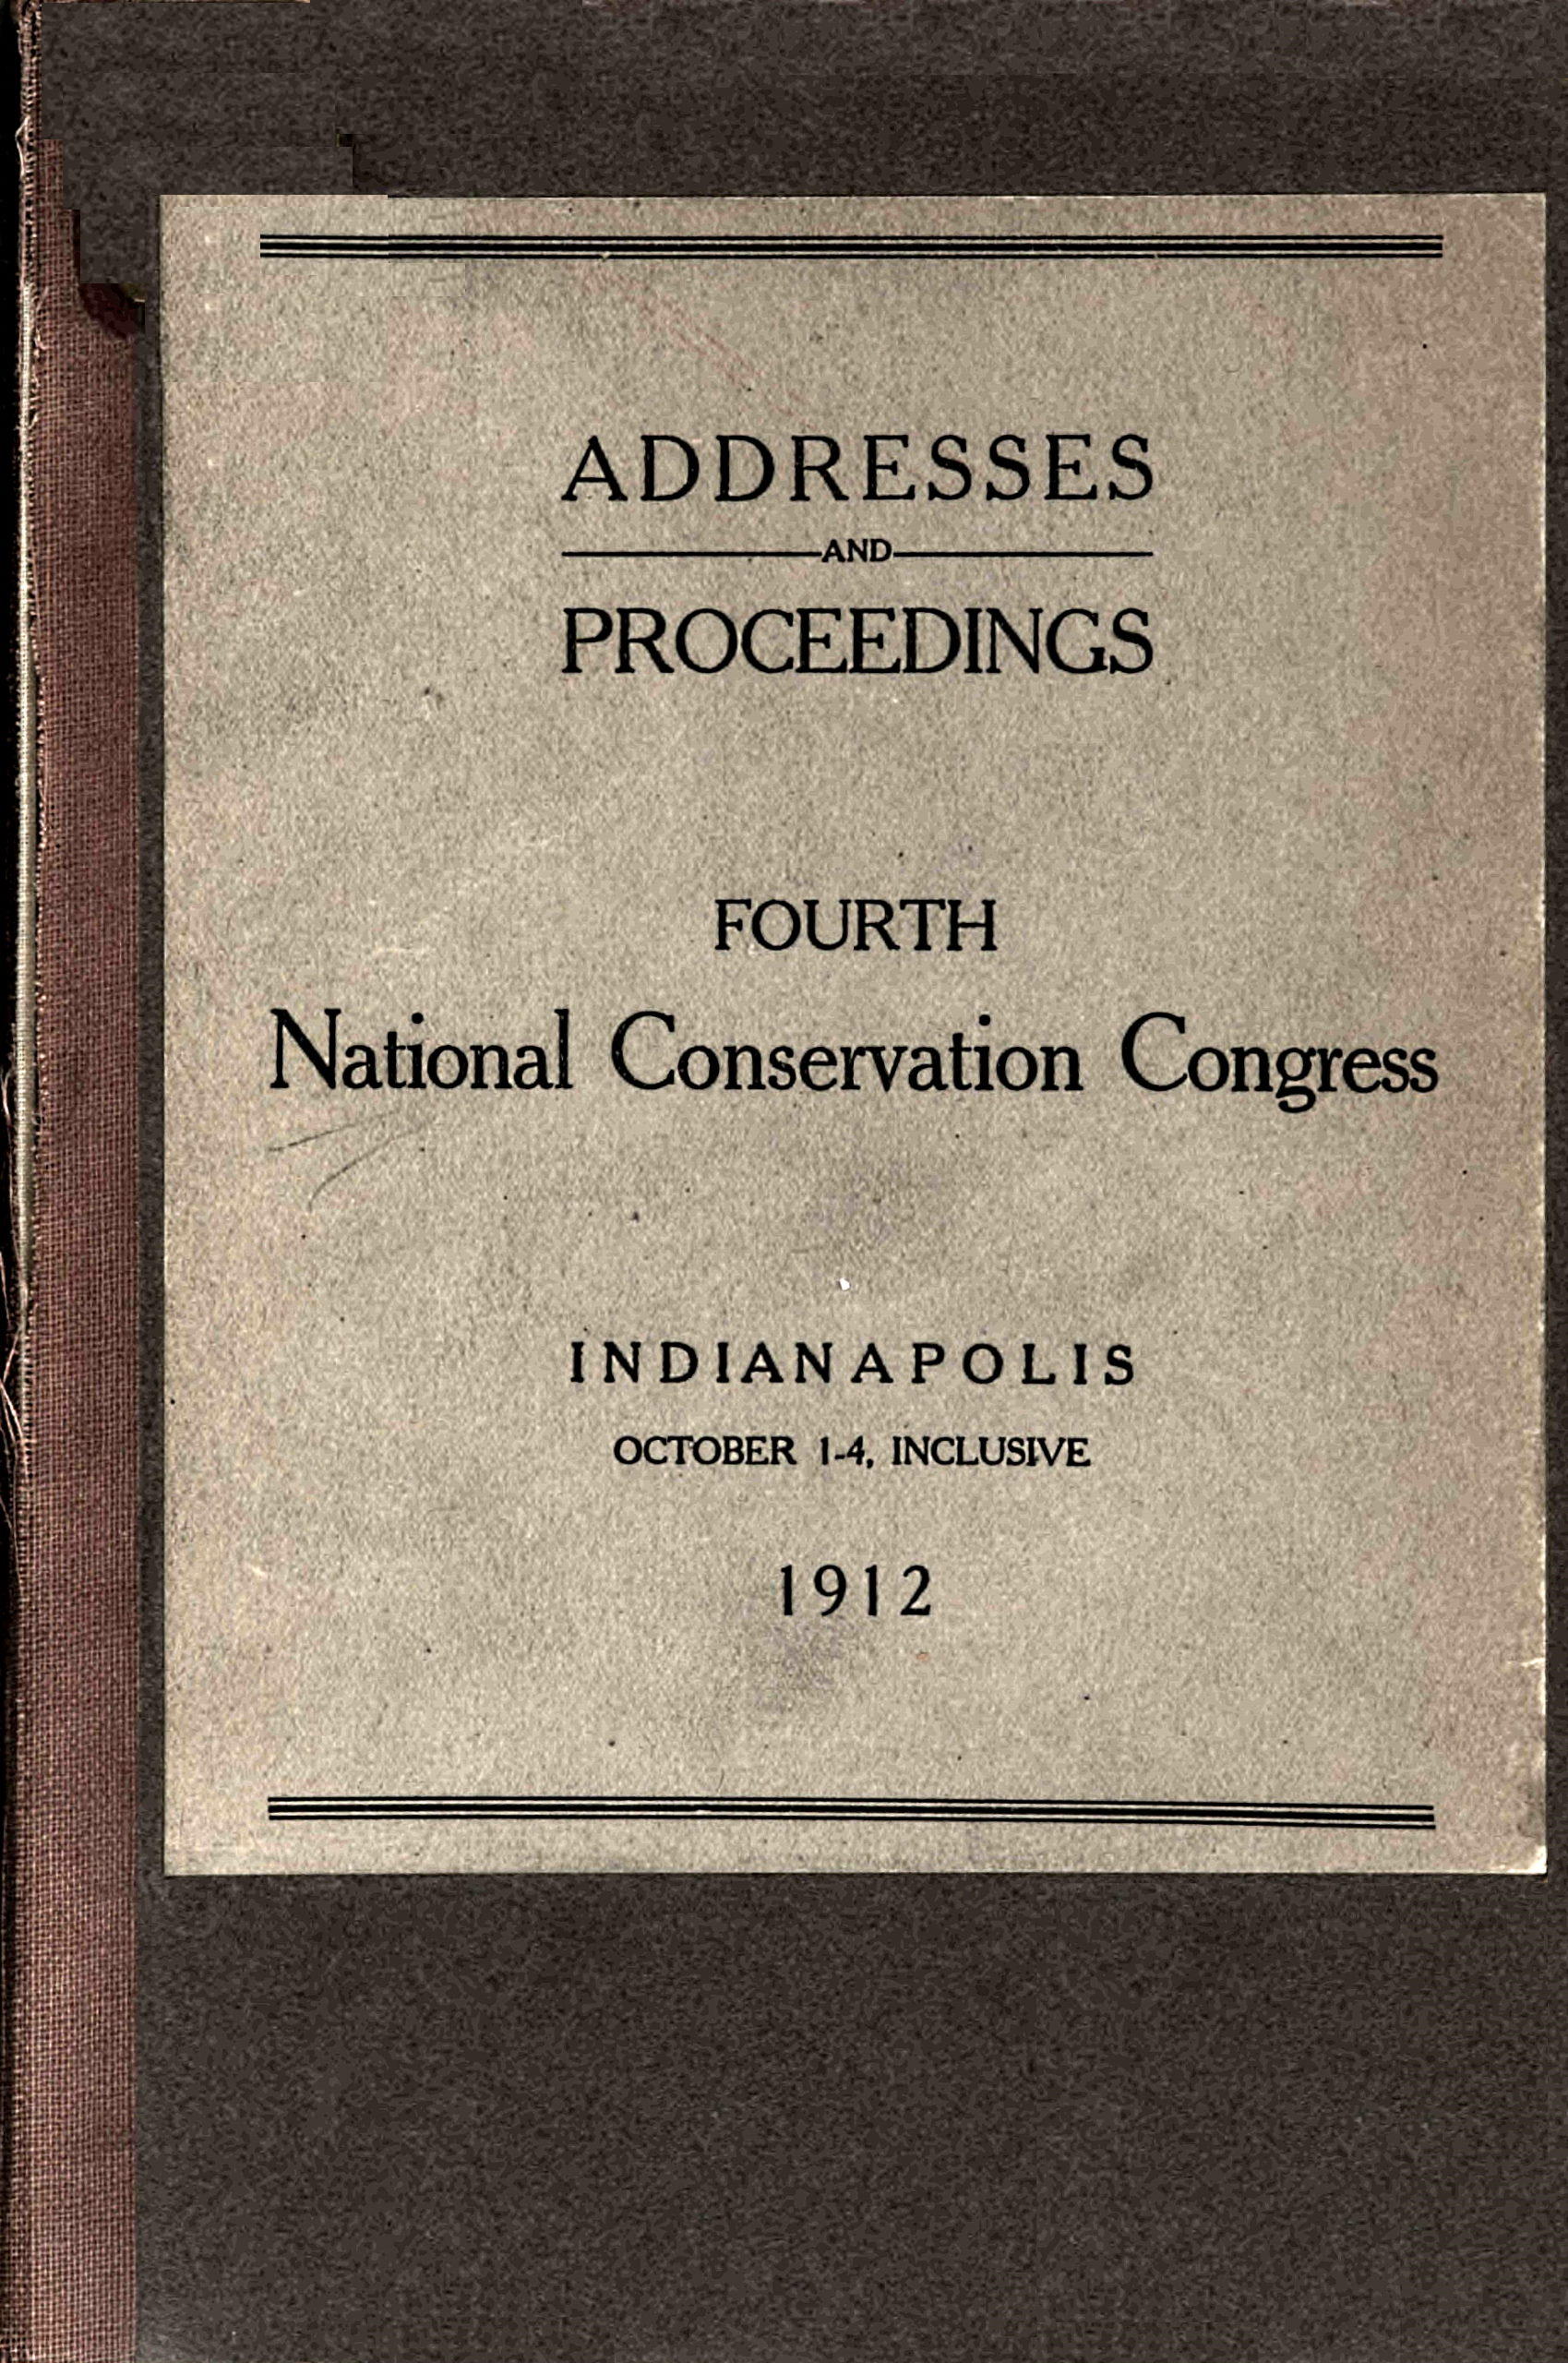 Proceedings Fourth National Conservation Congress, by Various—A Project  Gutenberg eBook